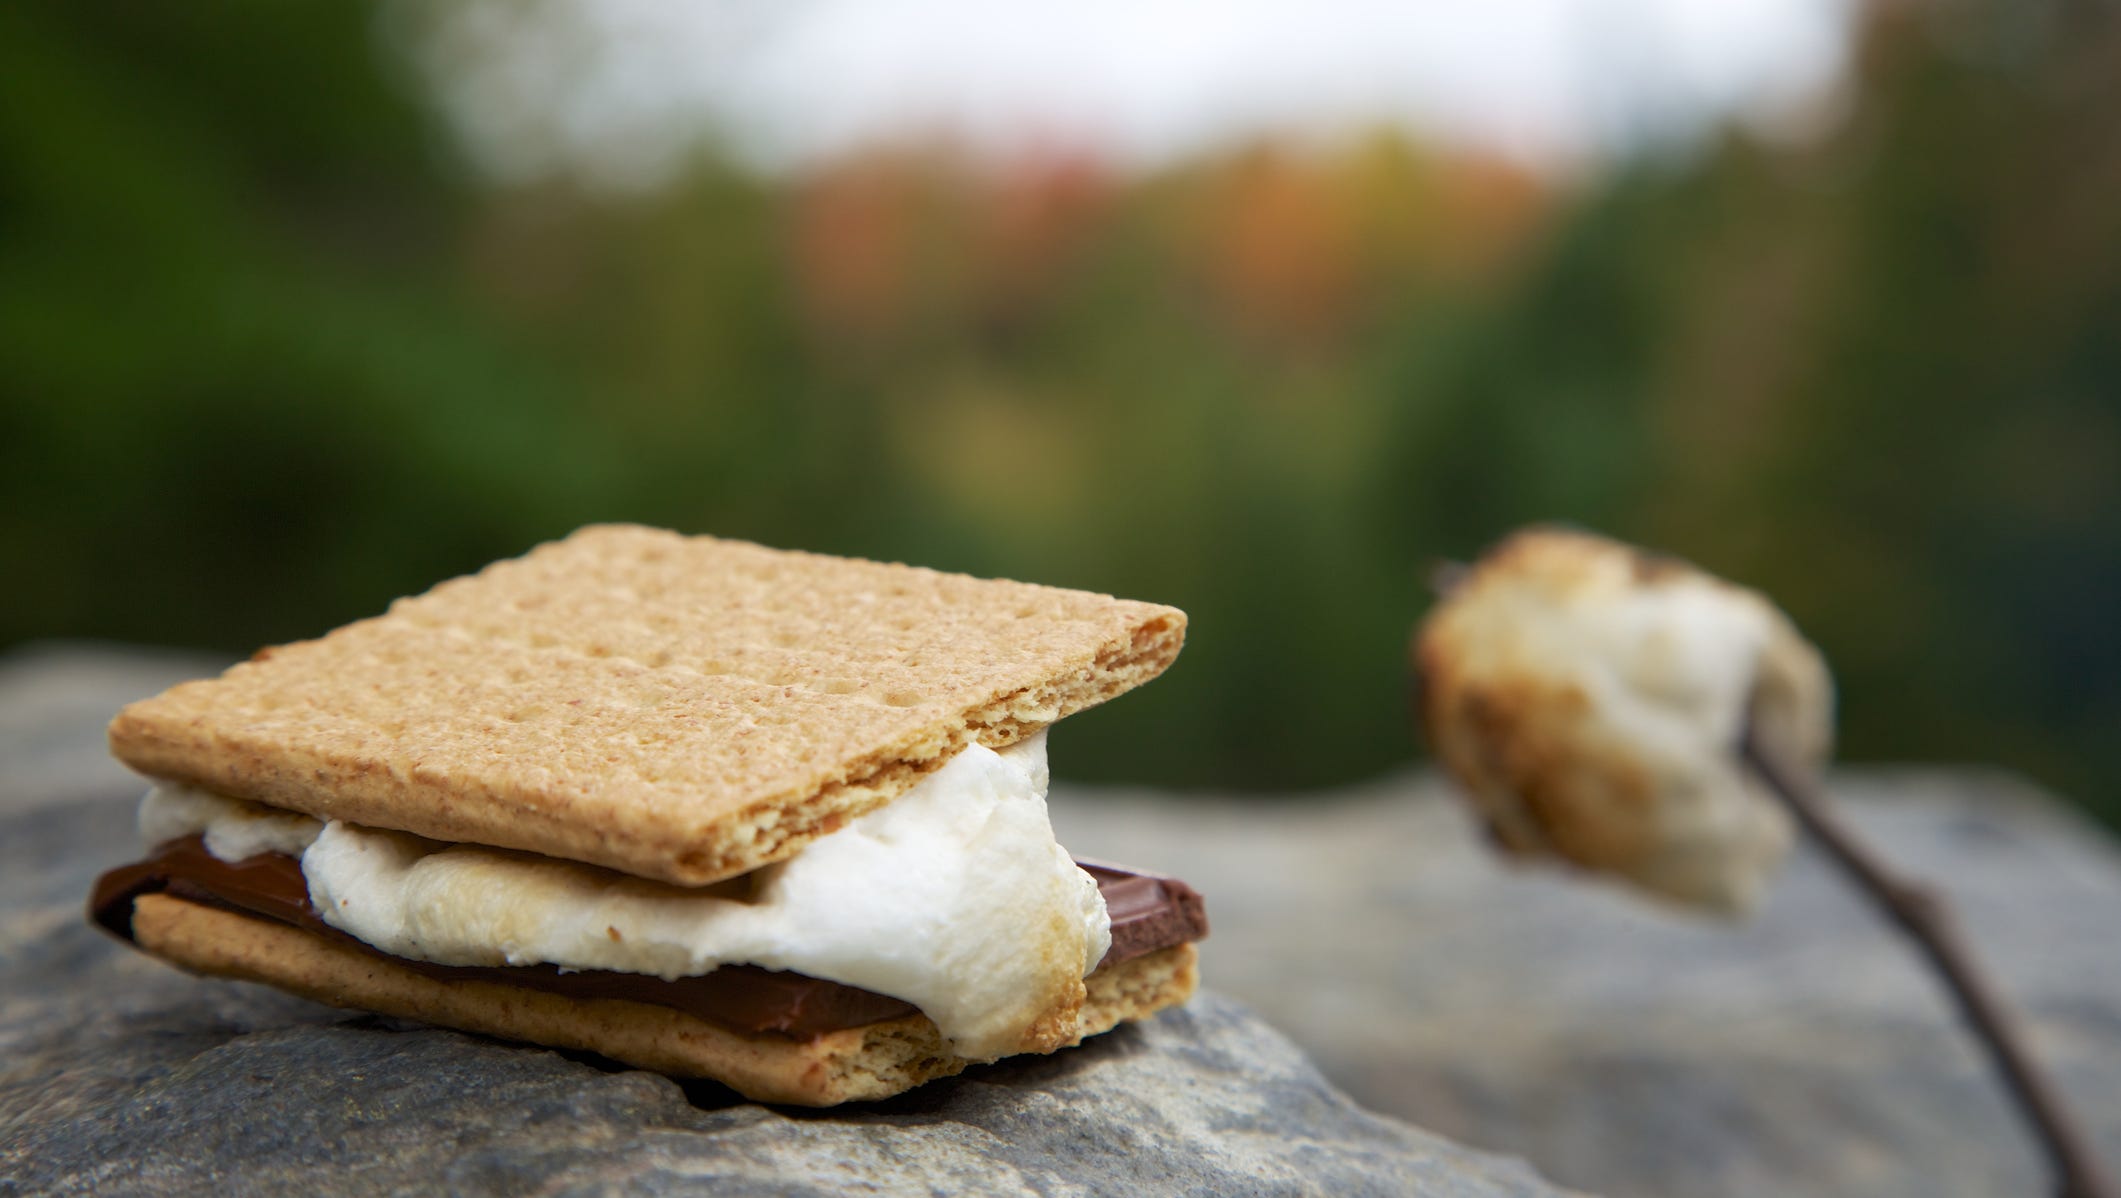 A perfectly melty s'mores treat rests on a boulder with a deliciously browned marshmallow nearby.